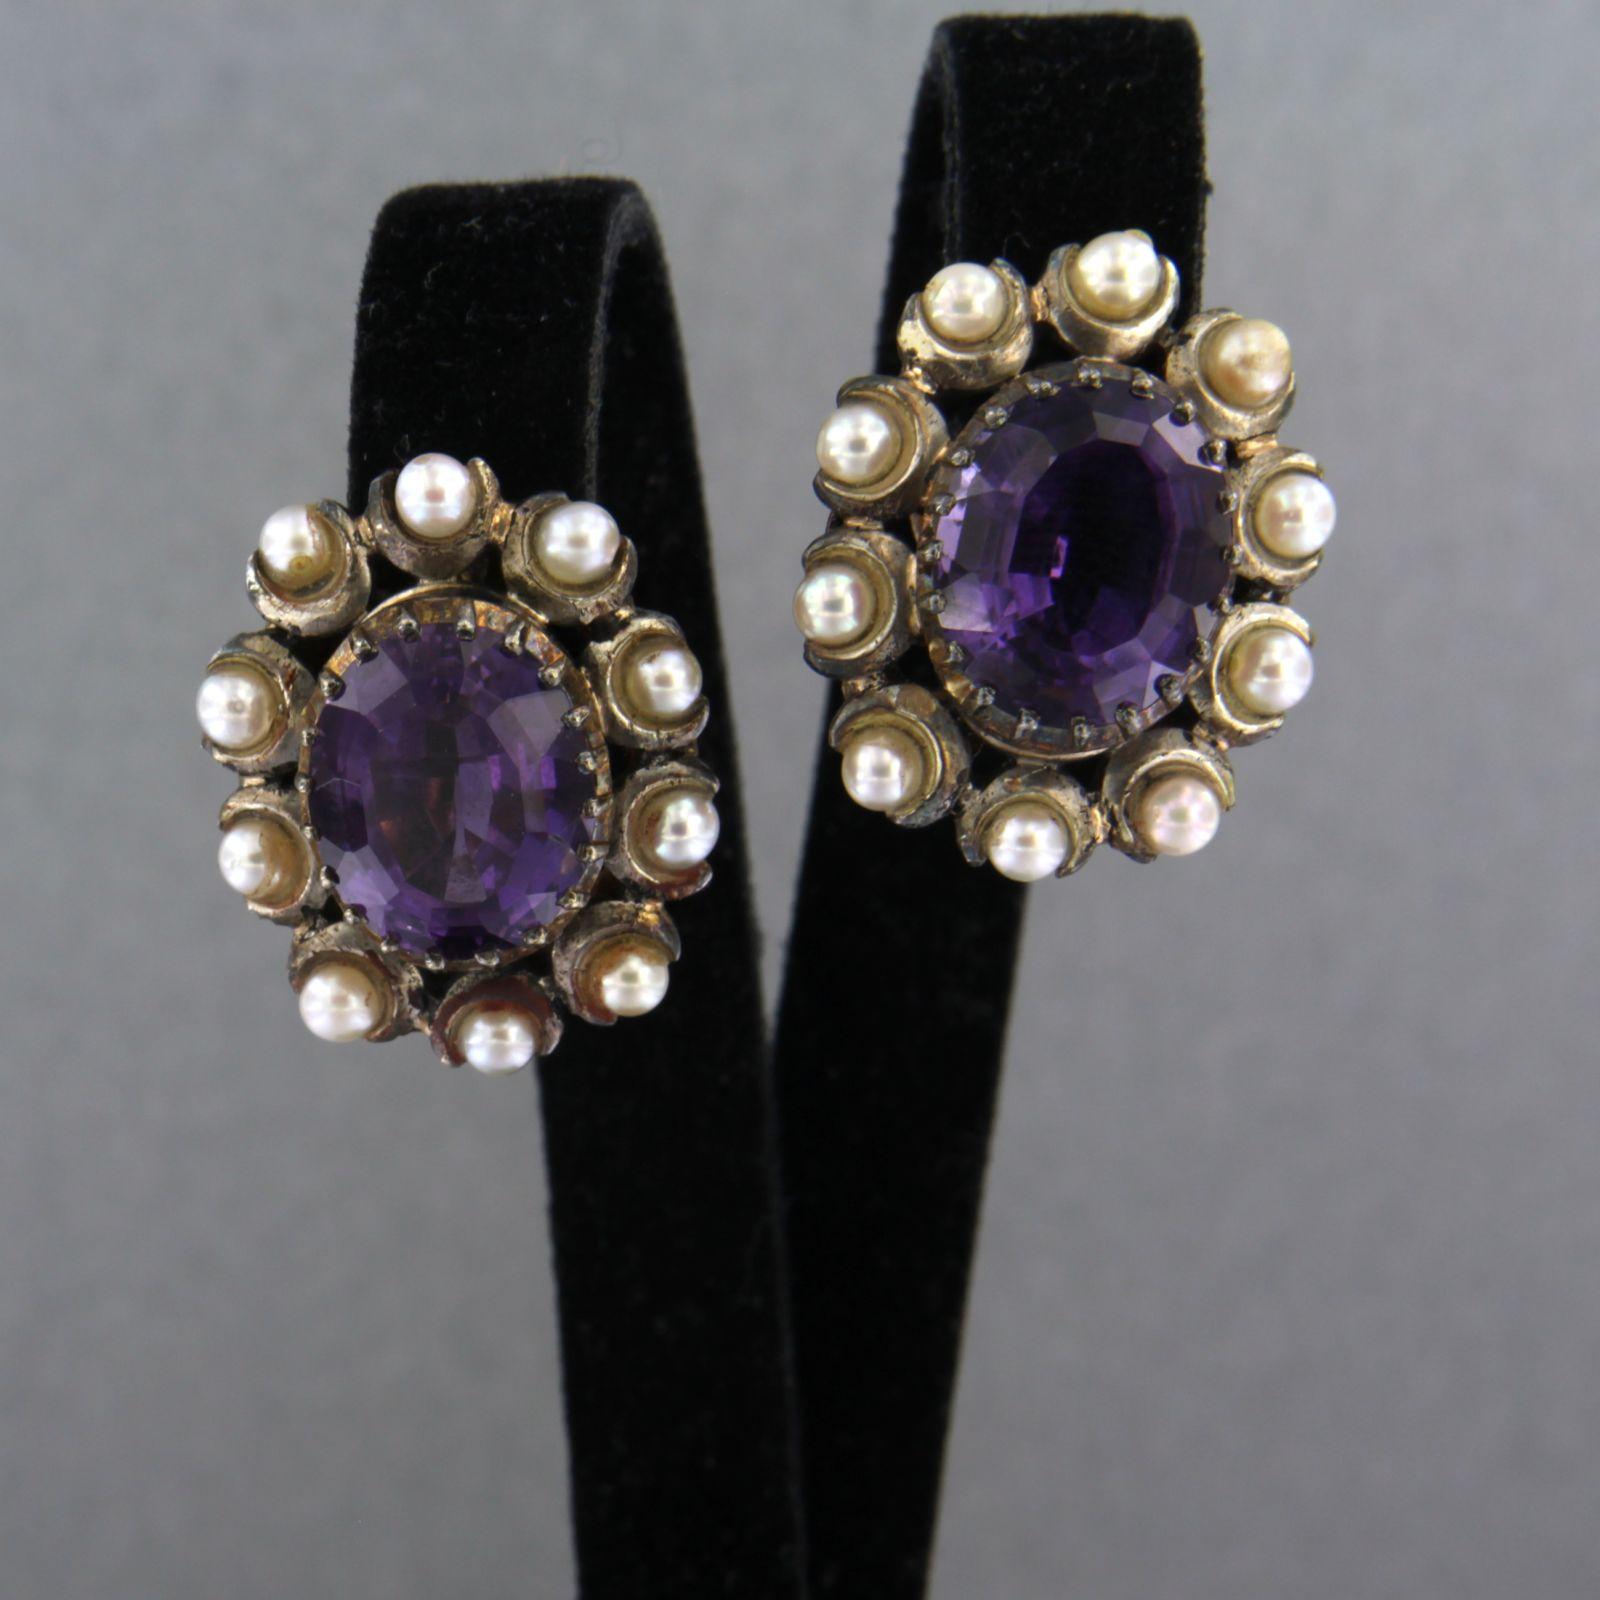 18k gold with silver ear clips with a central amethyst and entourage of pearls

detailed description:

the top of the ear clip is 2.3 cm high and 1.9 cm wide

weight 13.6 grams

set with

- 2 x 1.2 cm x 1.0 cm oval facet cut amethyst

color